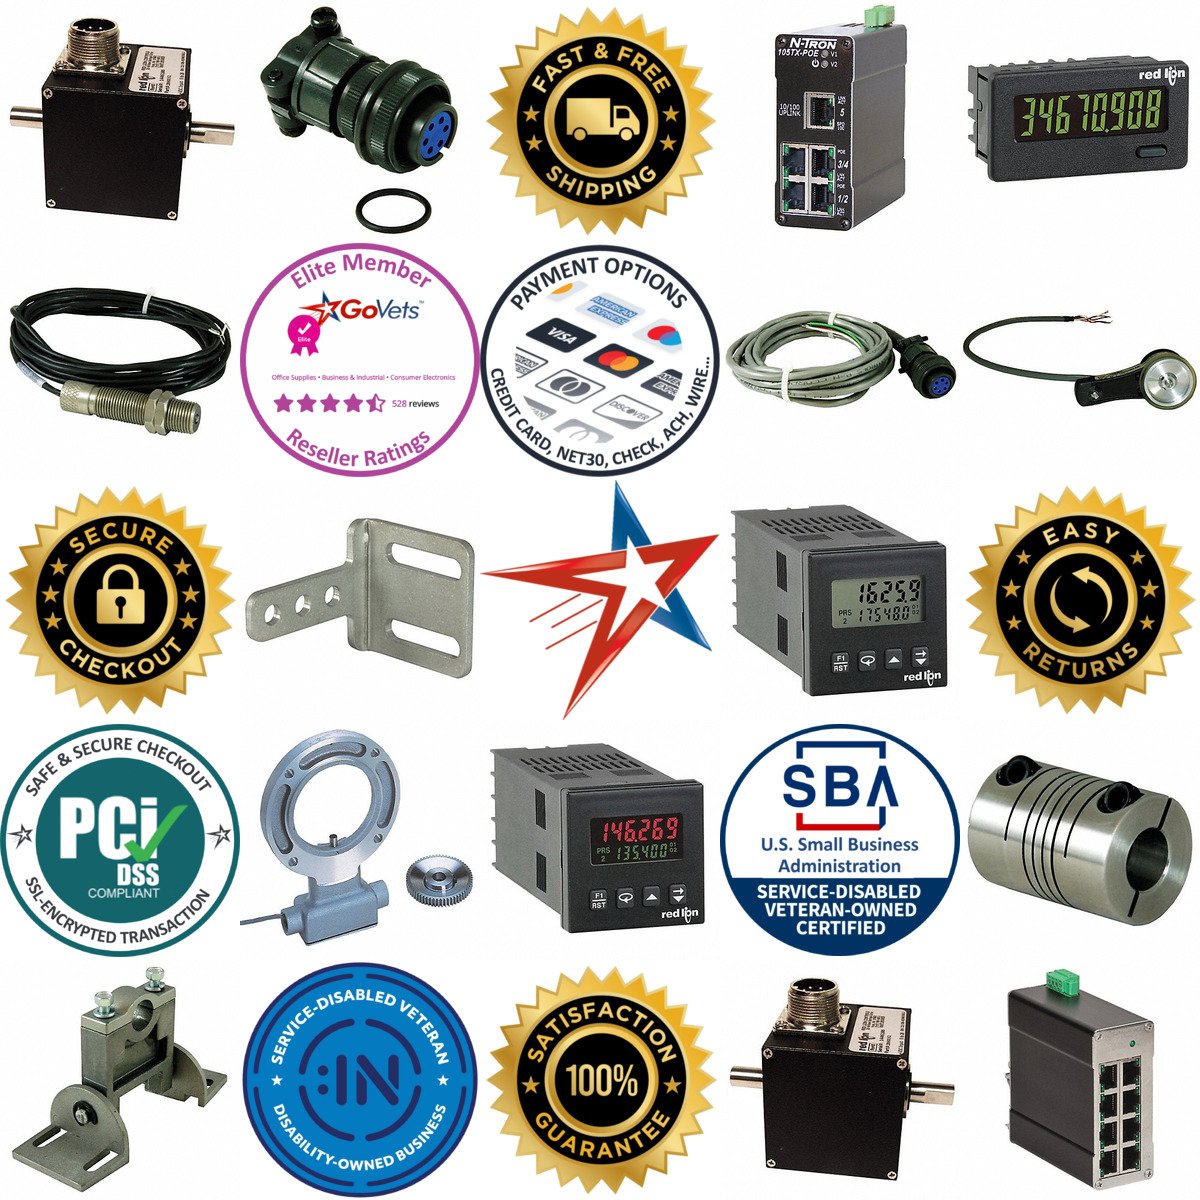 A selection of Encoders products on GoVets